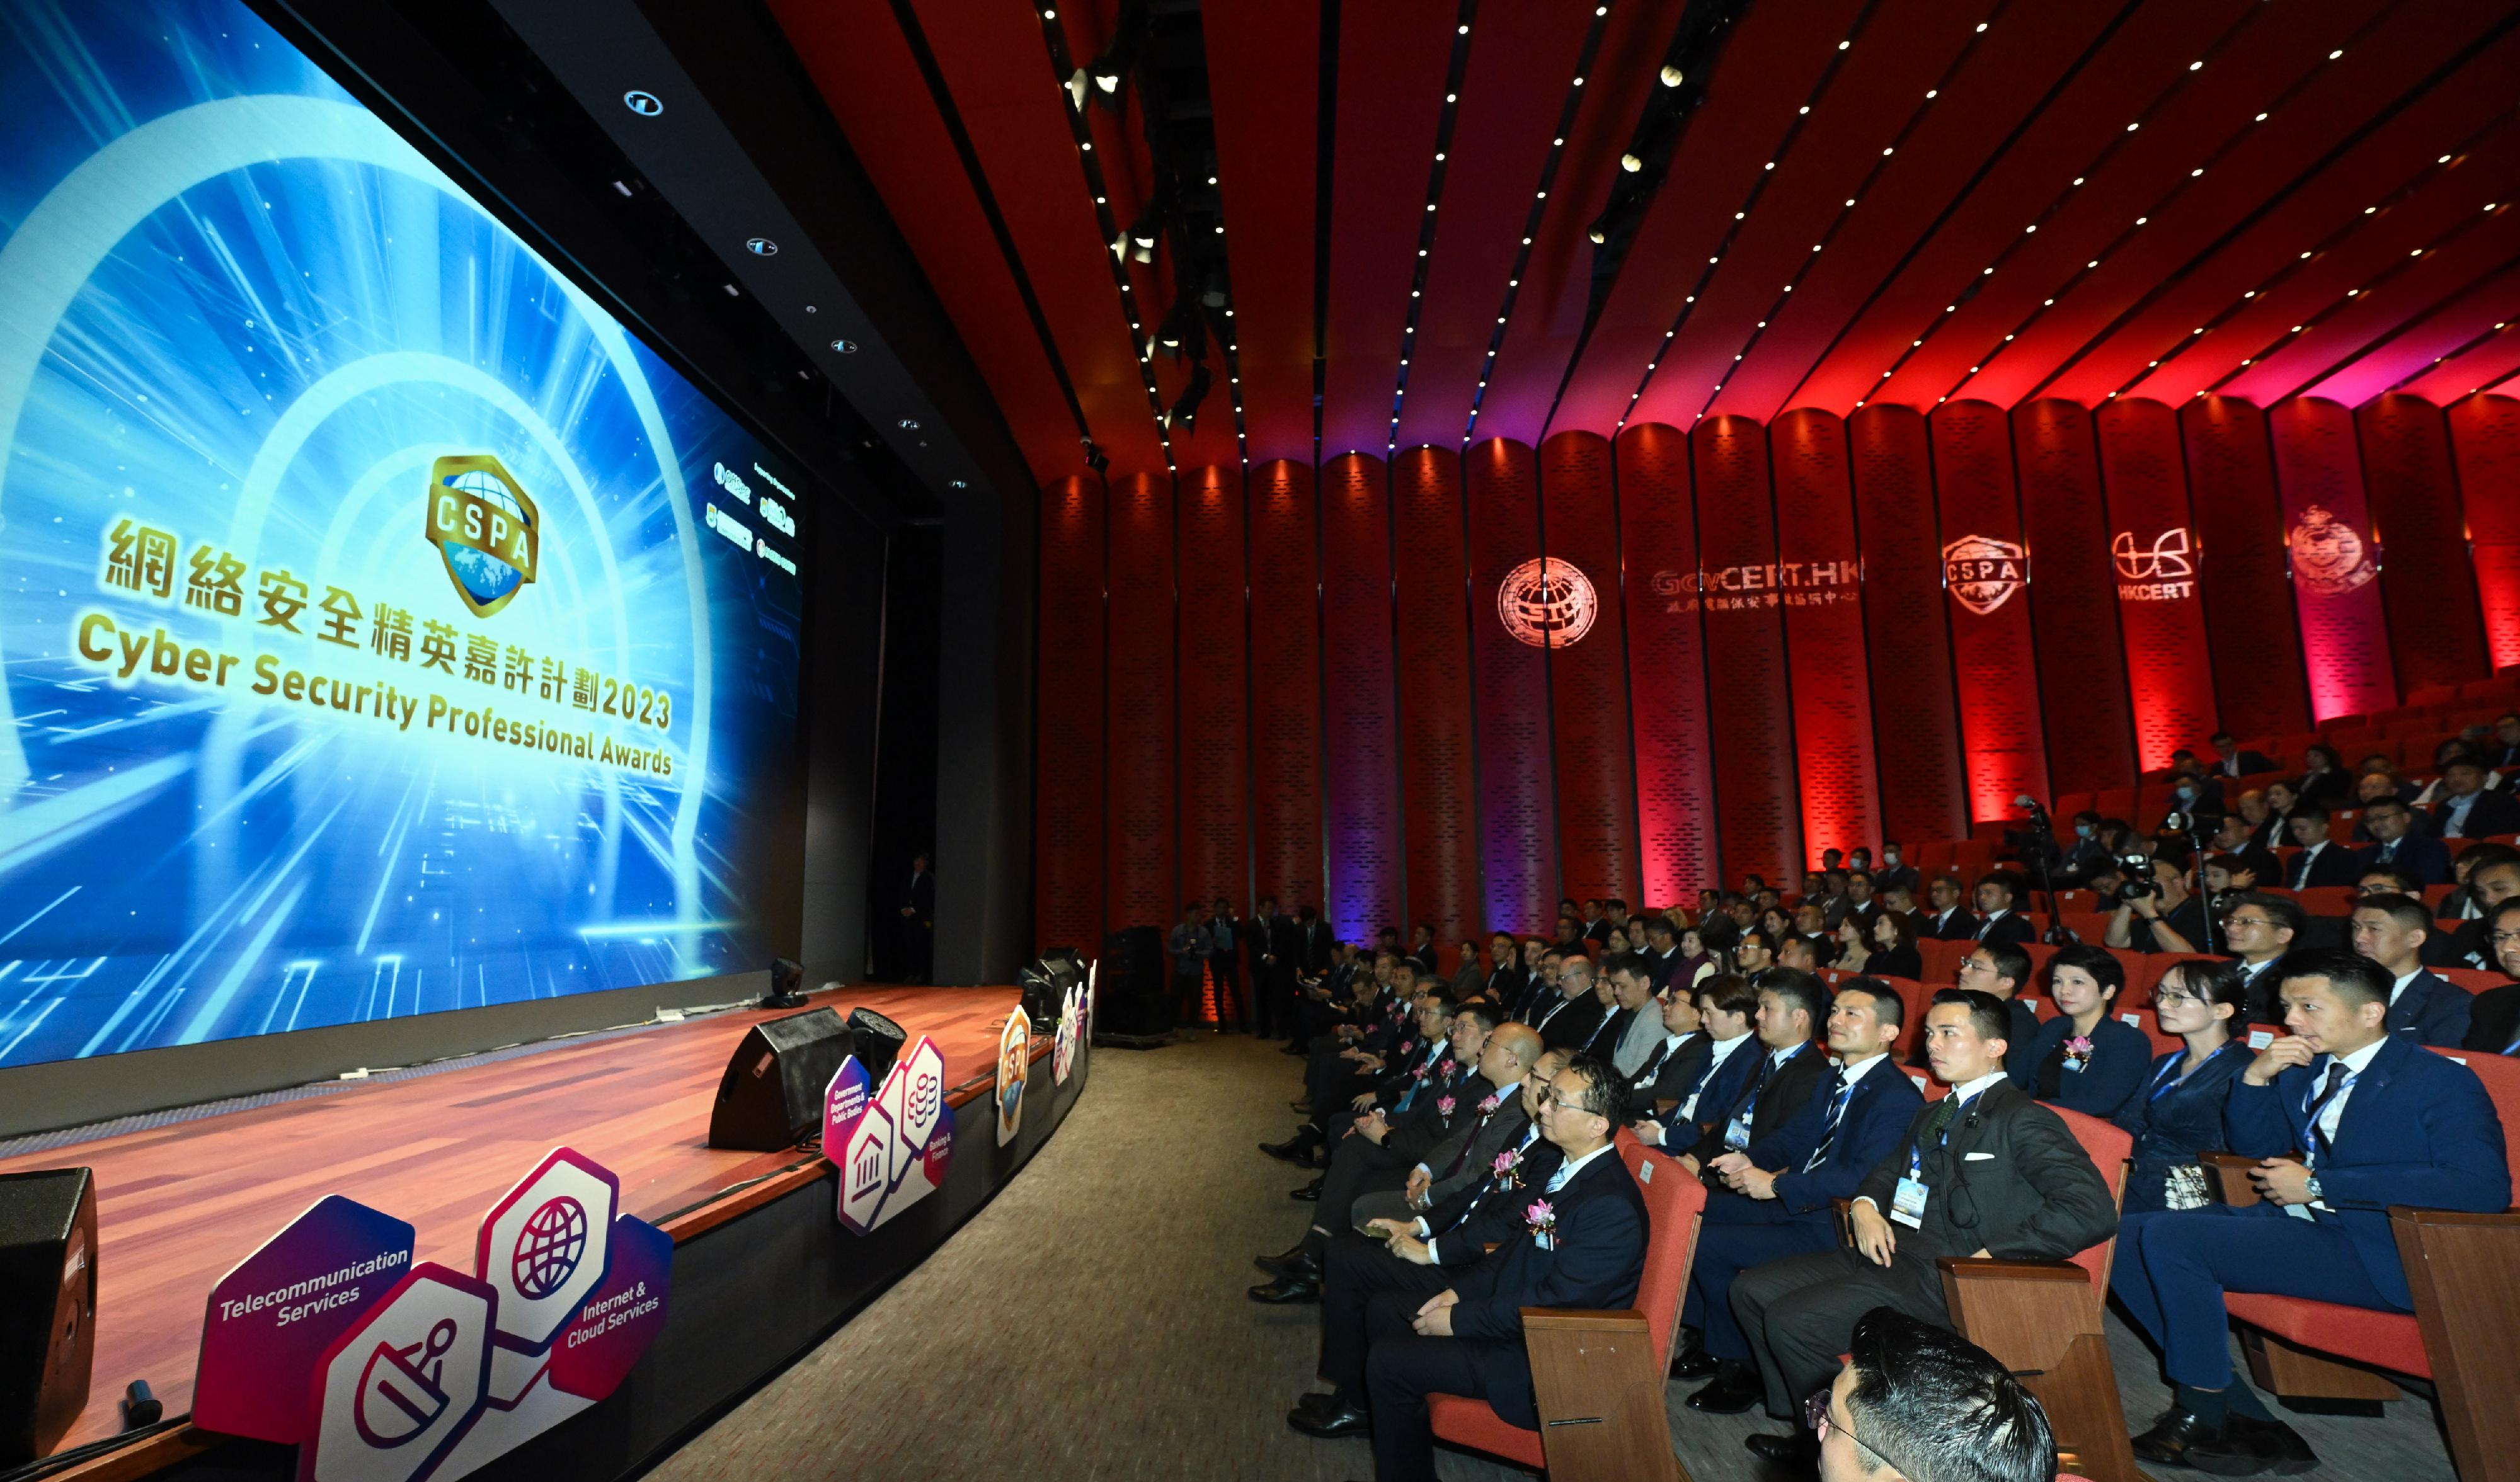 The Cyber Security Professional Awards 2023 presentation ceremony was held by the Hong Kong Police Force today (February 29). Cyber security professionals from nearly 100 institutions participate in the event, demonstrating dynamic synergies.